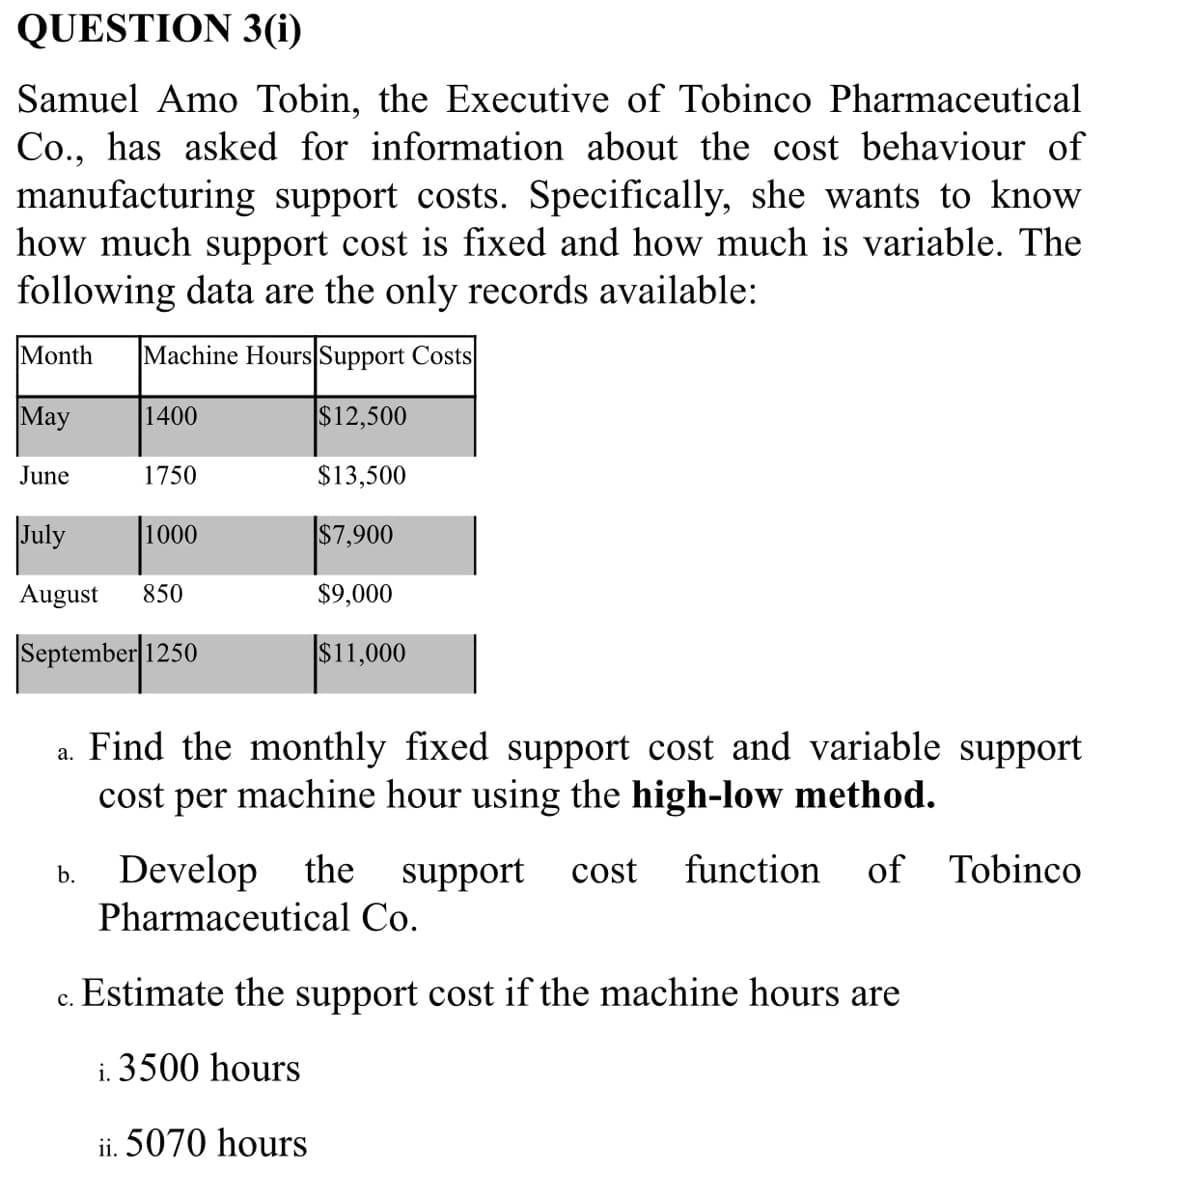 QUESTION 3(i)
Samuel Amo Tobin, the Executive of Tobinco Pharmaceutical
Co., has asked for information about the cost behaviour of
manufacturing support costs. Specifically, she wants to know
how much support cost is fixed and how much is variable. The
following data are the only records available:
Month
Machine Hours Support Costs
Мay
1400
$12,500
June
1750
$13,500
July
1000
$7,900
August
850
$9,000
September 1250
$11,000
Find the monthly fixed support cost and variable support
cost per machine hour using the high-low method.
Develop the support
cost
function
of Tobinco
Pharmaceutical Co.
Estimate the support cost if the machine hours are
с.
i. 3500 hours
ii. 5070 hours
